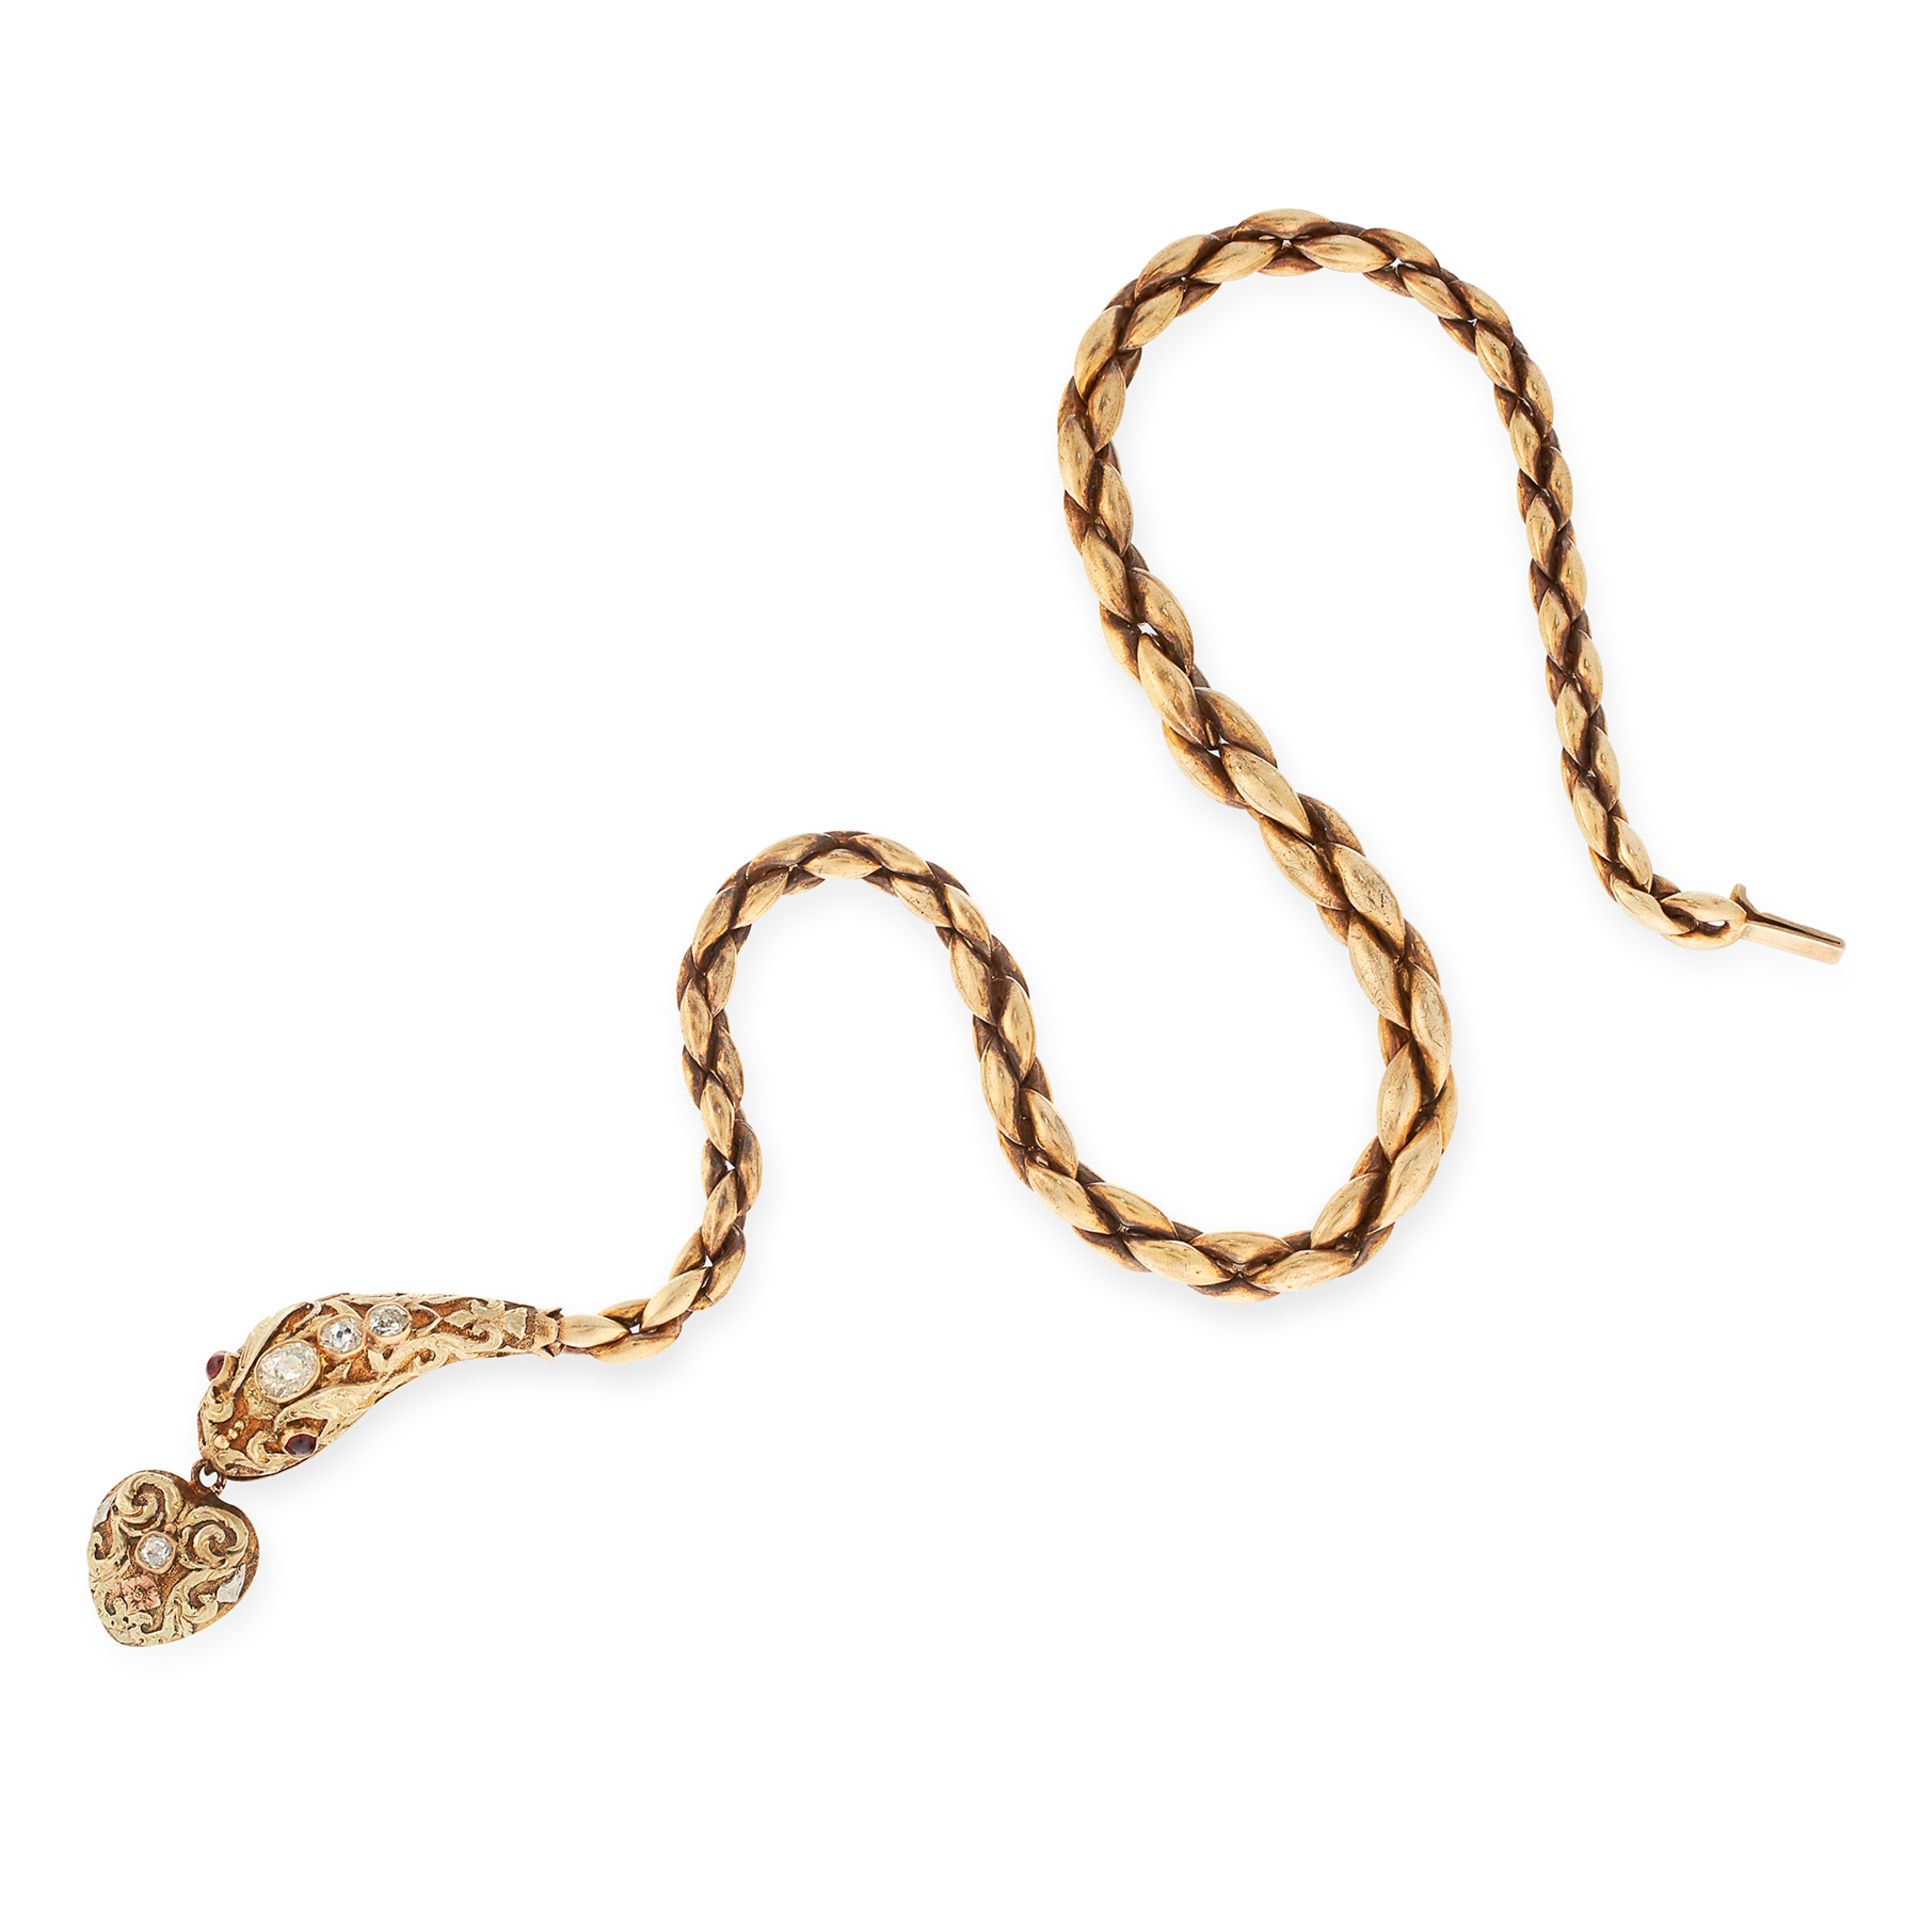 AN ANTIQUE DIAMOND AND GARNET MOURNING LOCKET SNAKE NECKLACE, 19TH CENTURY in yellow gold, formed as - Image 2 of 2